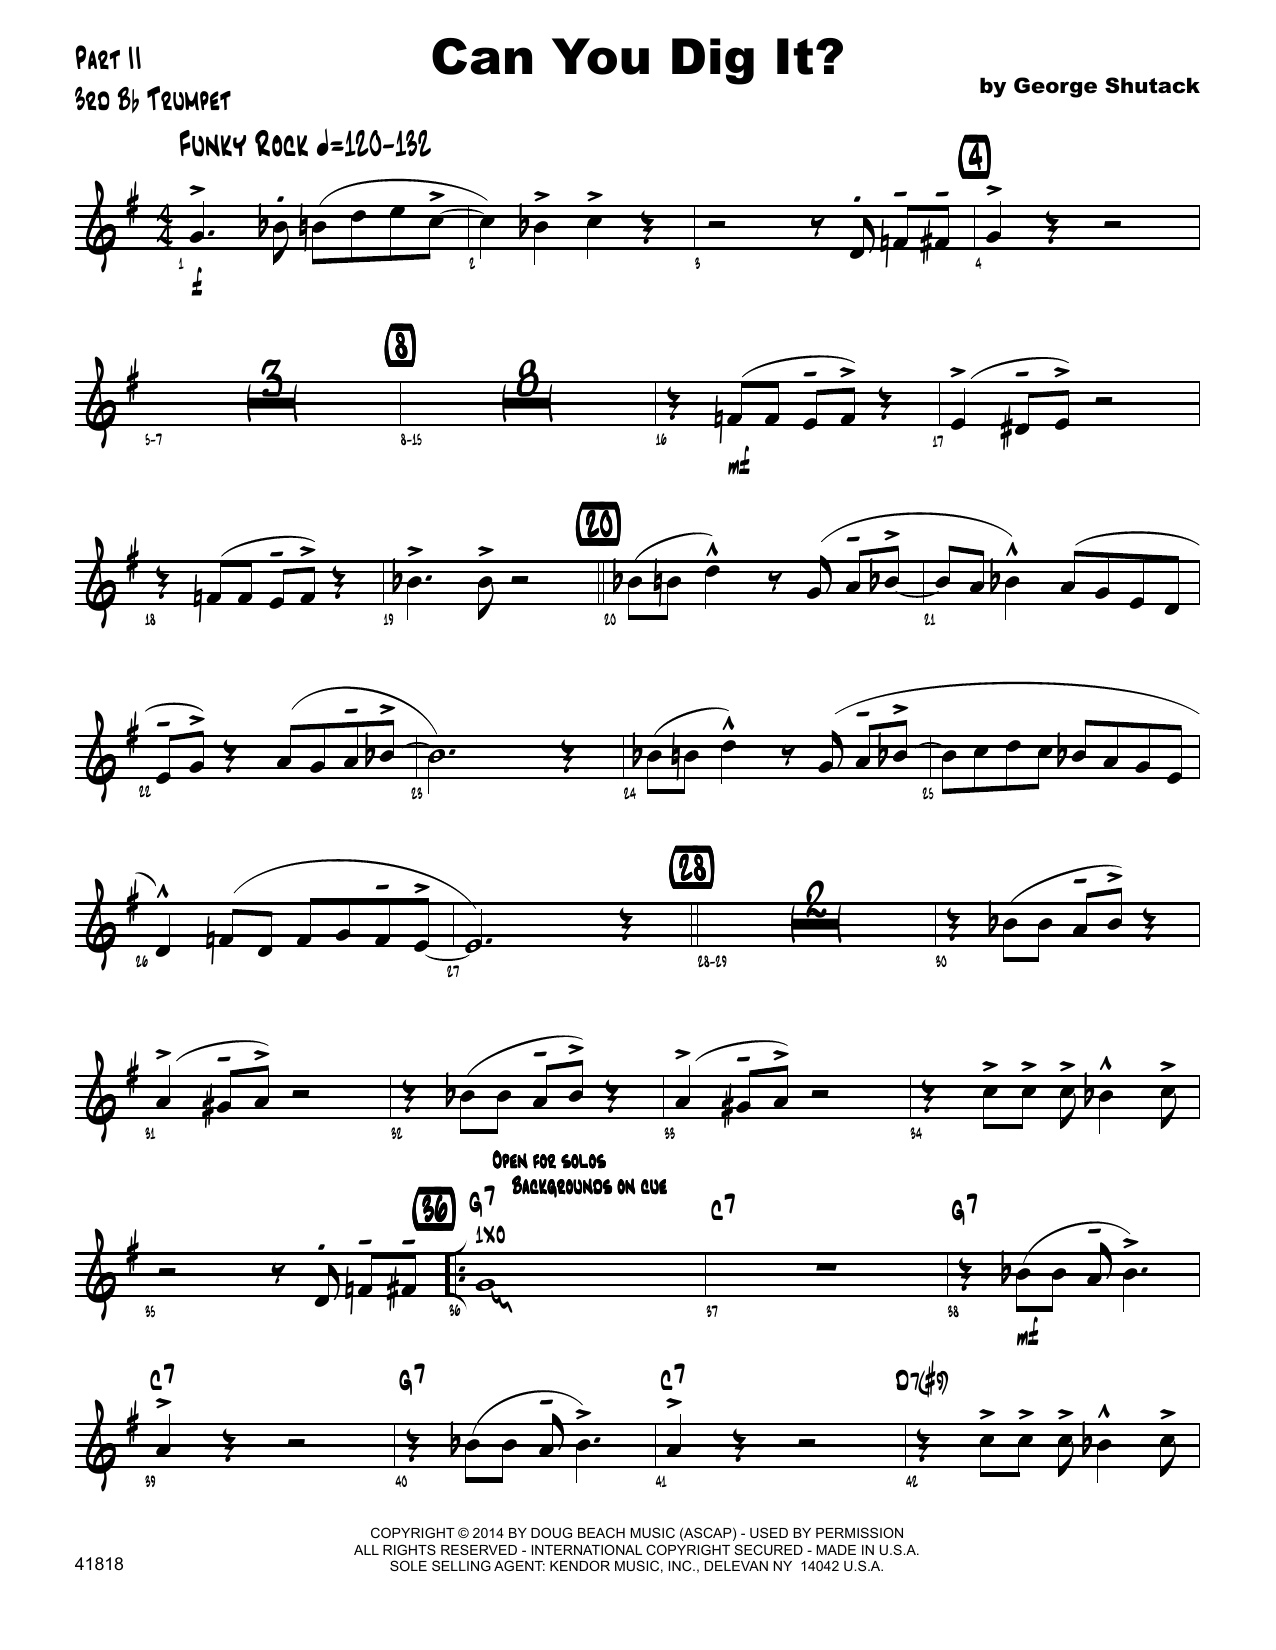 Download George Shutack Can You Dig It? - 3rd Bb Trumpet Sheet Music